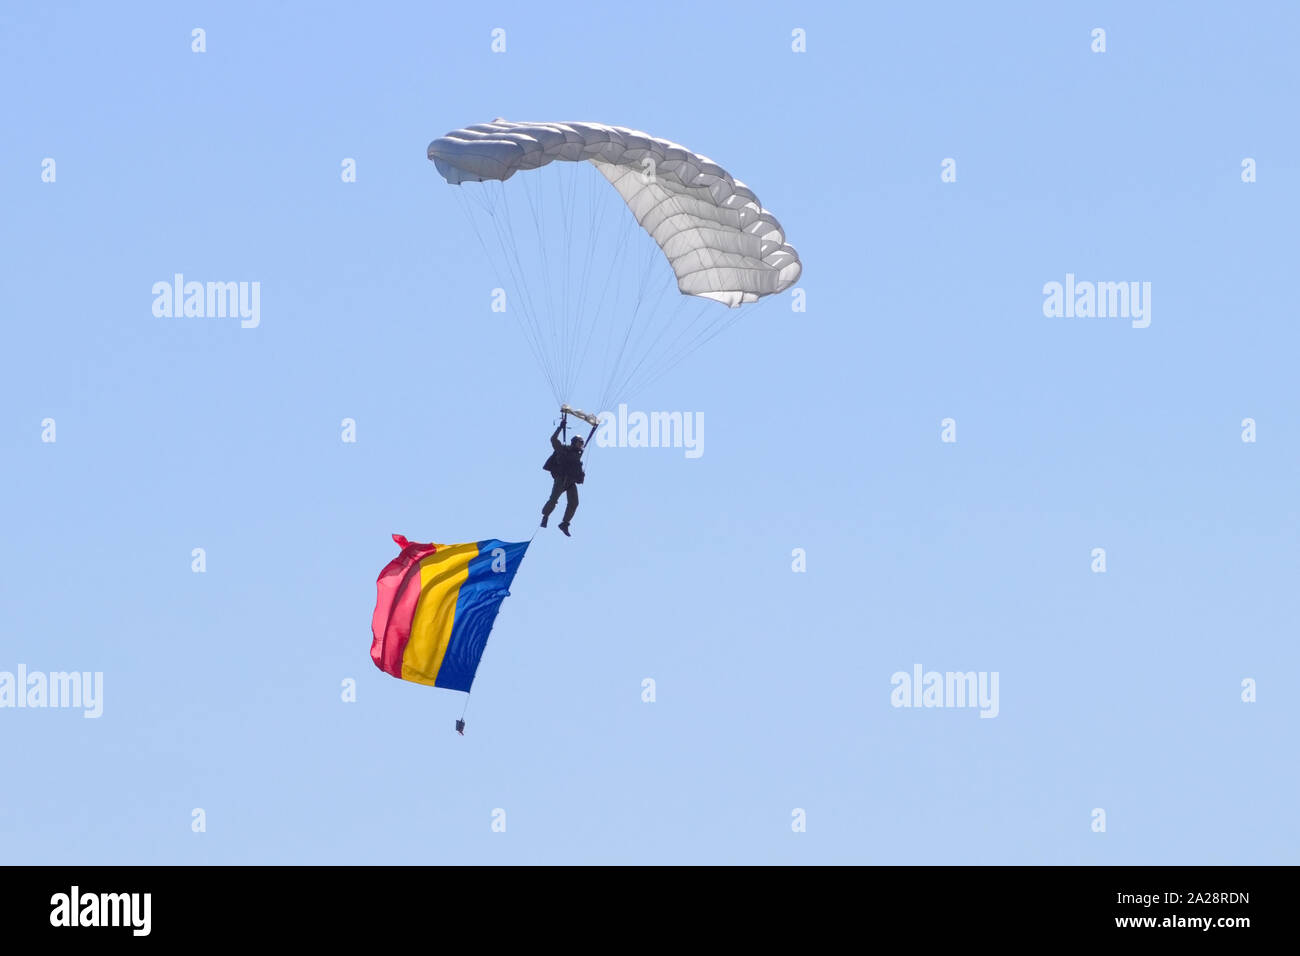 OSTRAVA, CZECH REPUBLIC - SEPTEMBER 22, 2019: NATO Days. Paratrooper descends after an airdrop over the airport, with Czech flag attached to him. Stock Photo